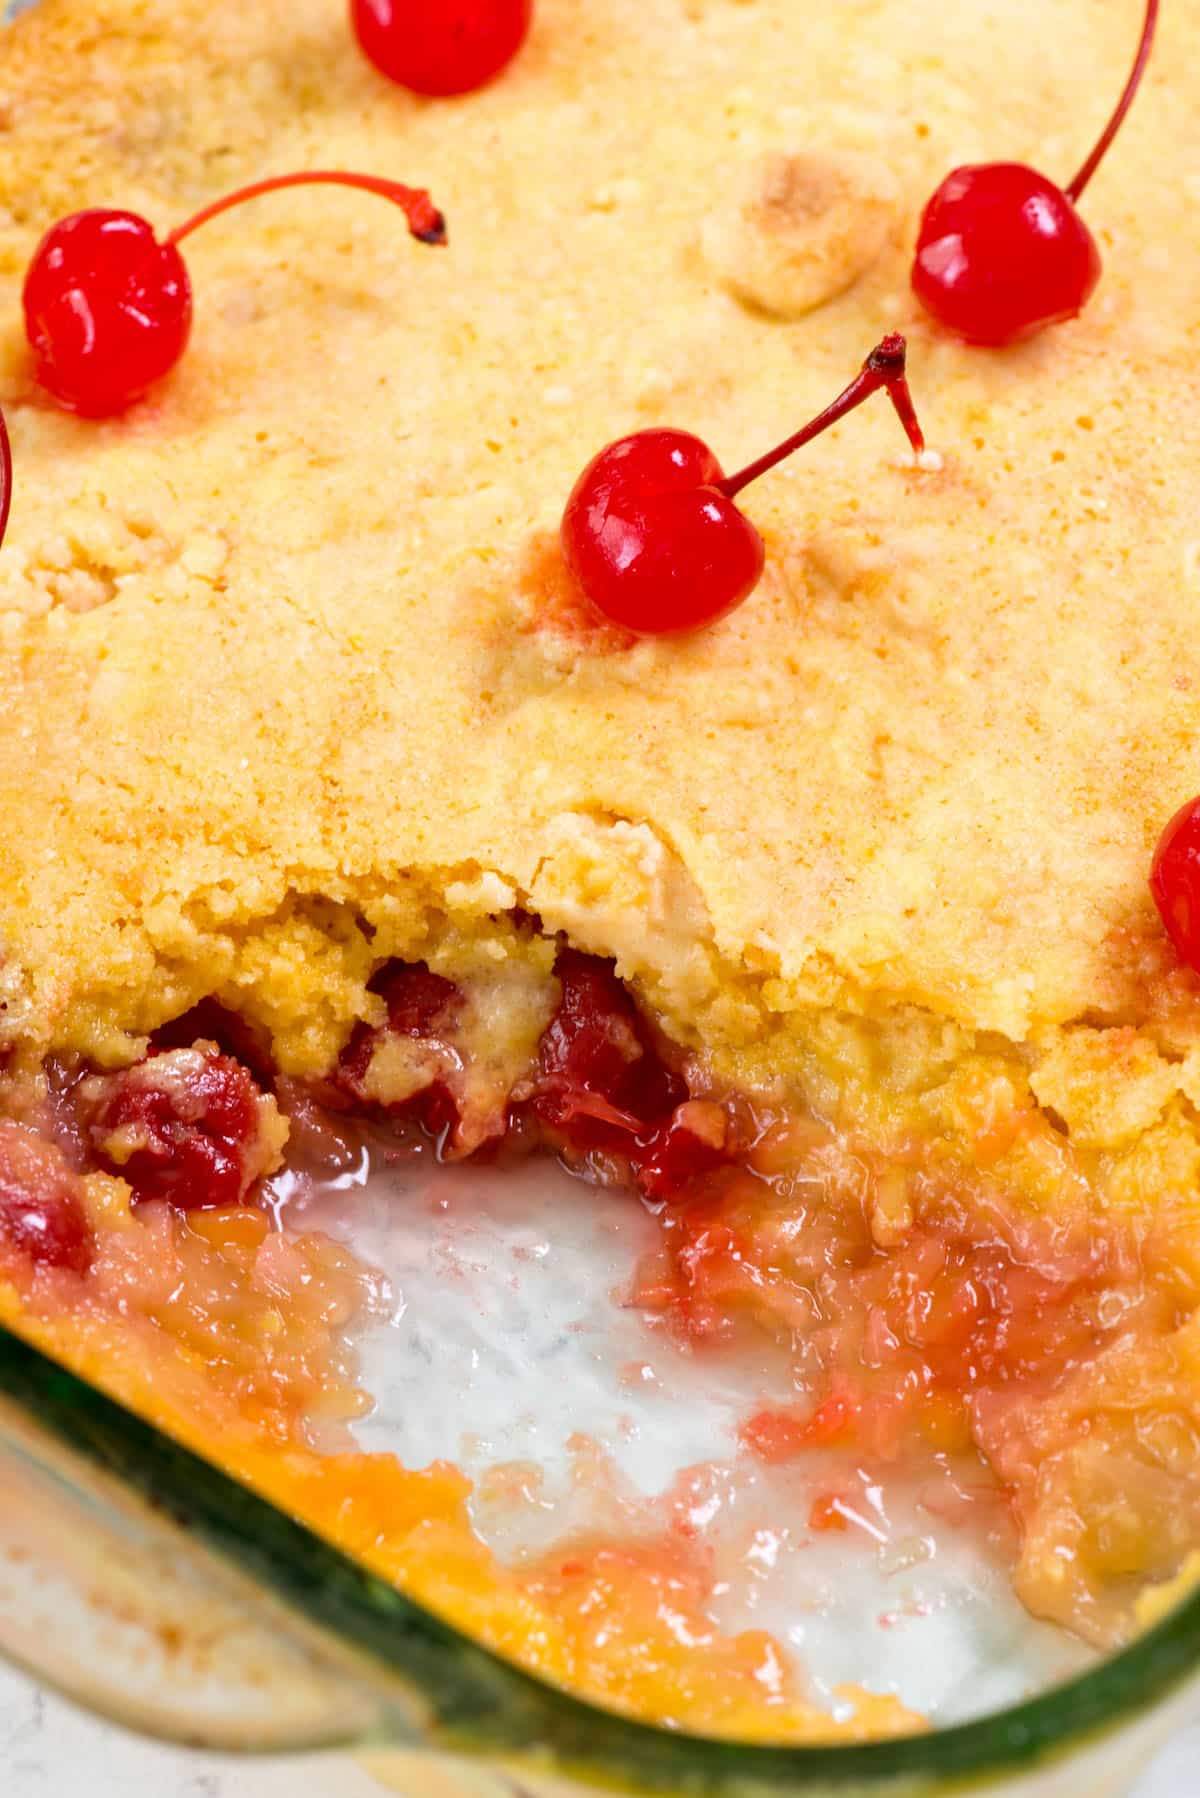 pineapple dump cake in glass pan with slice missing and cherries on top